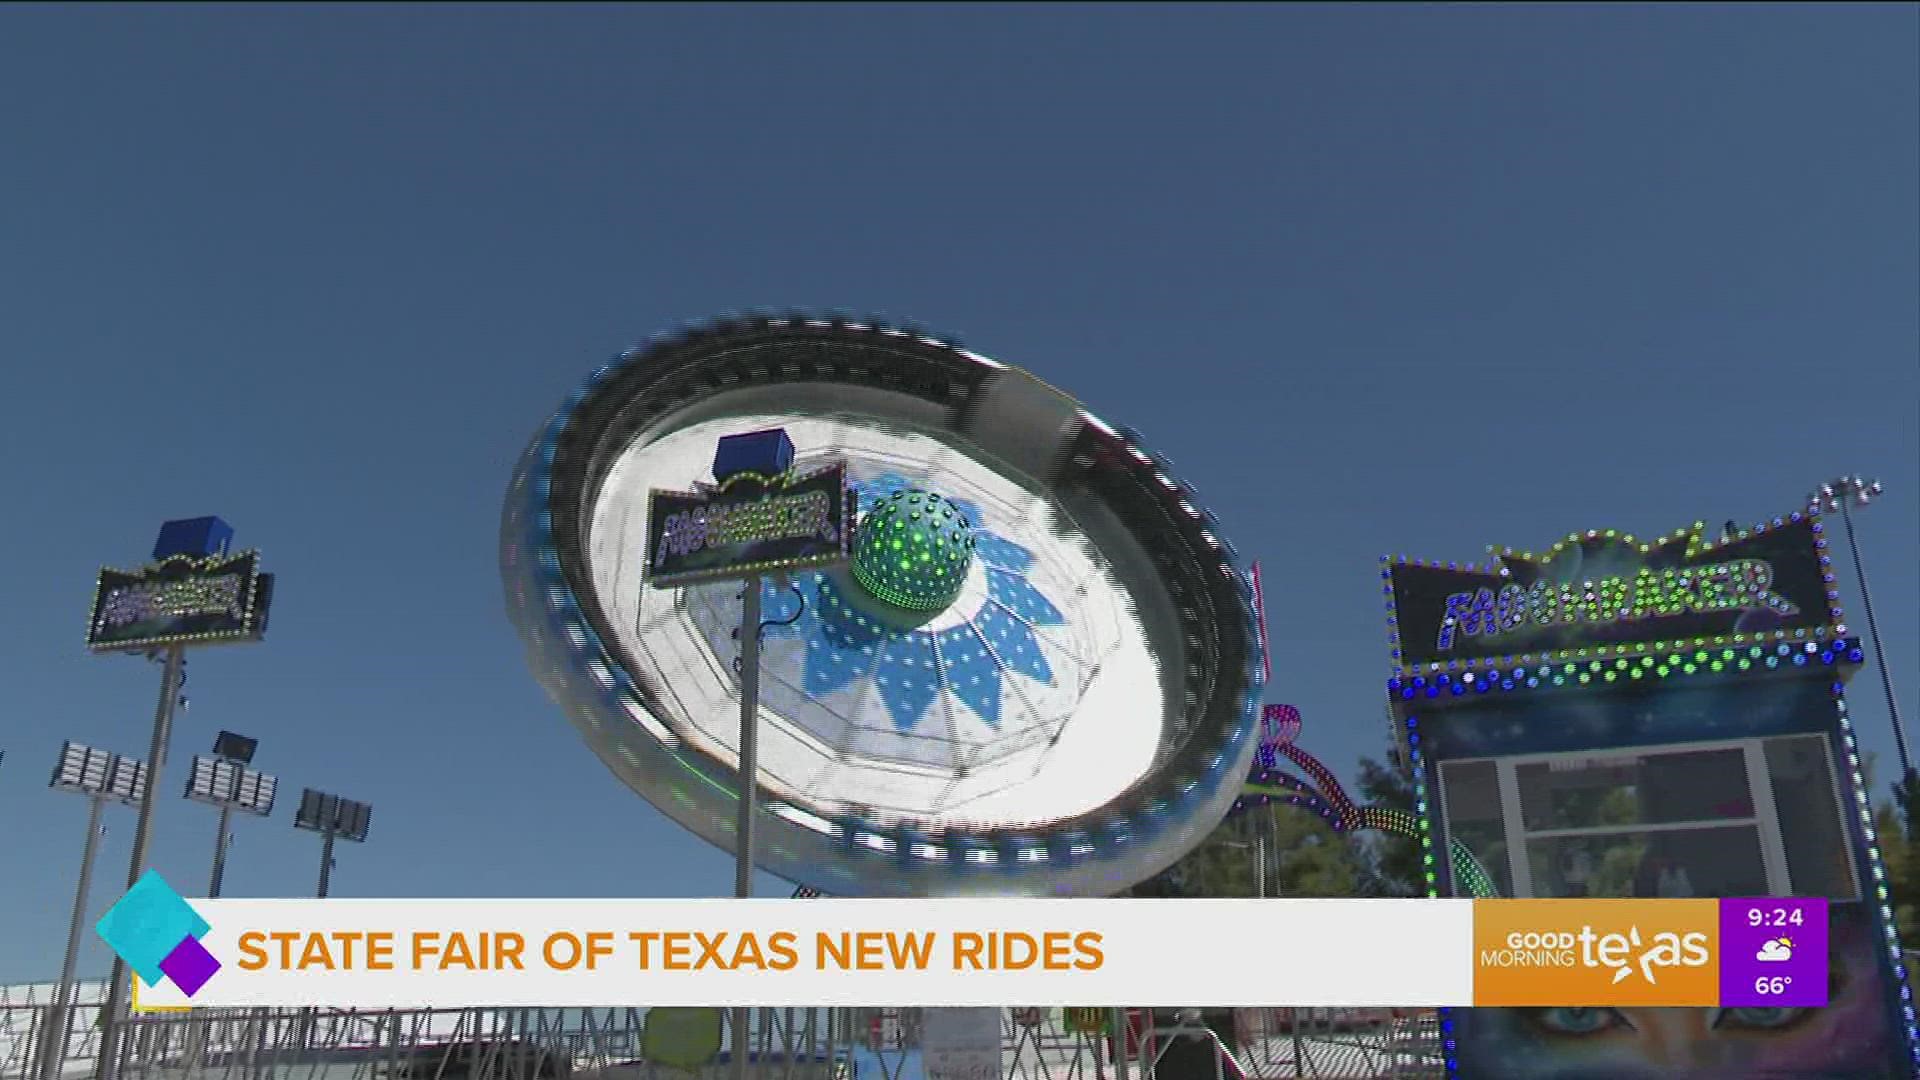 Hannah & Paige hop on some of the new rides at the State Fair of Texas